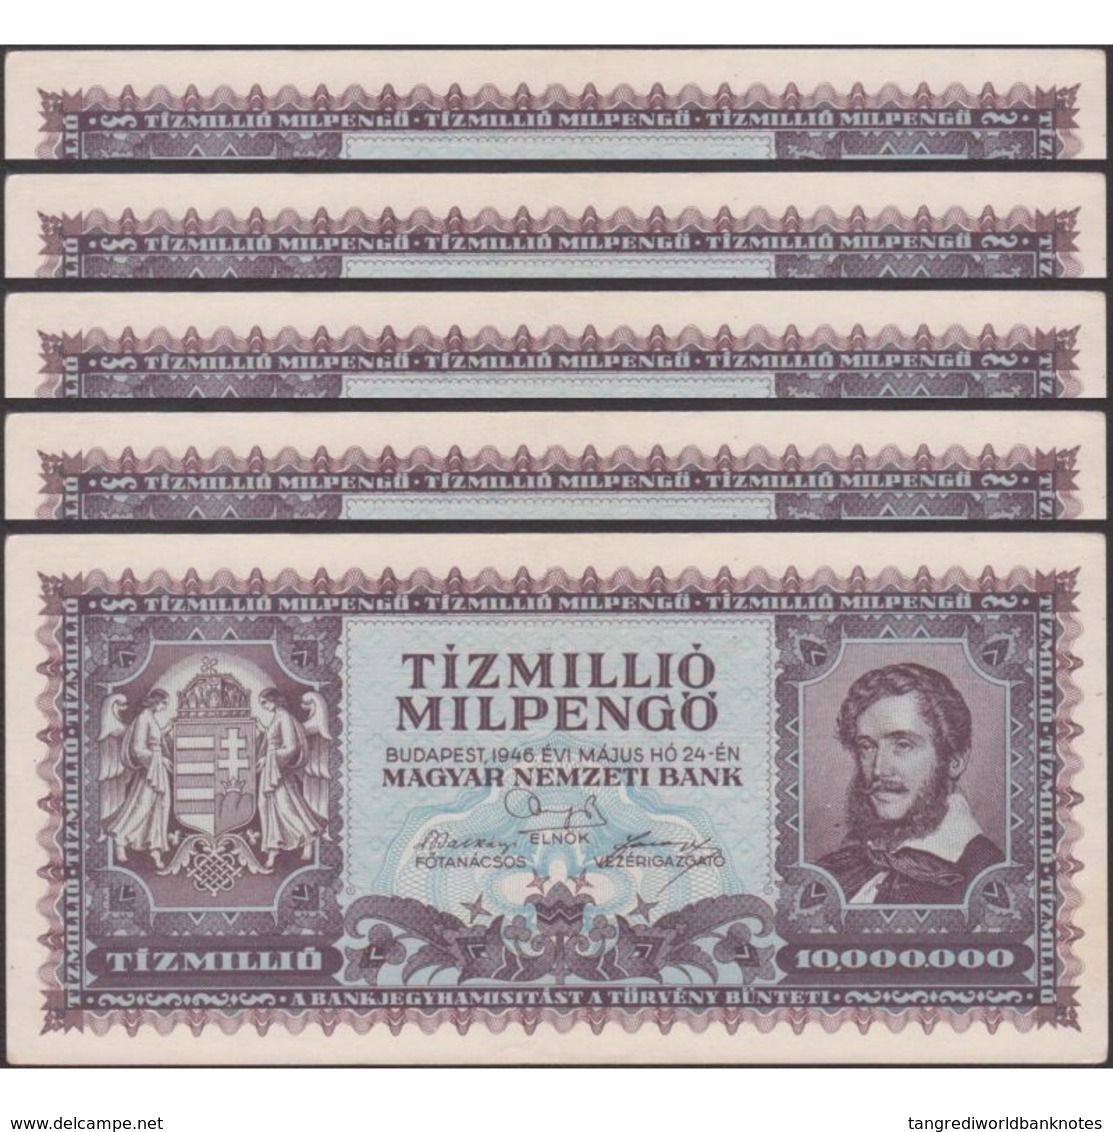 TWN - HUNGARY 129 - 10000000 10.000.000 Milpengo 24.5.1946 DEALERS LOT X 5 - No Serial F/VF - Ungheria